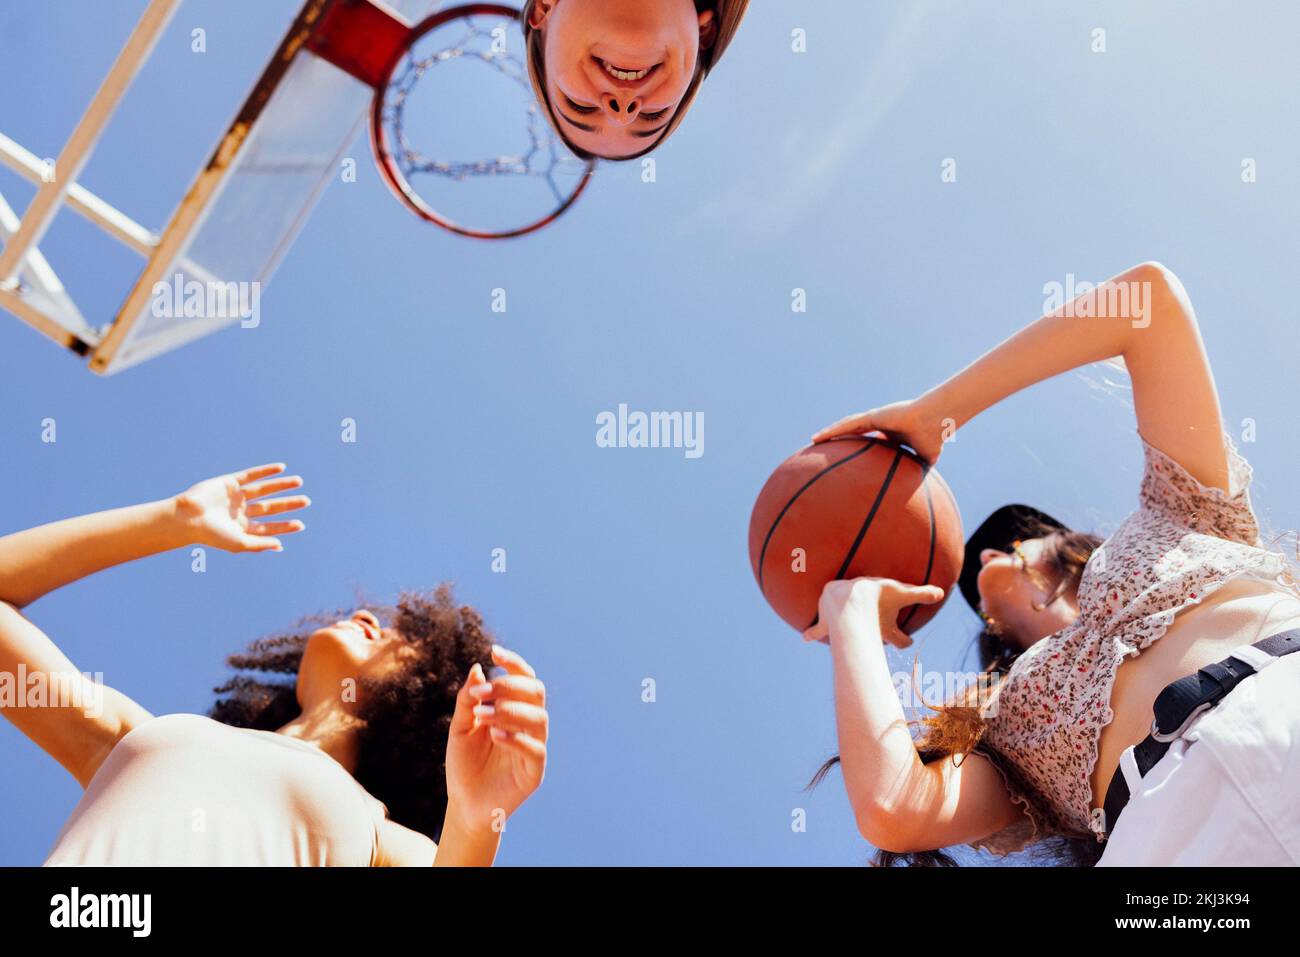 Serious Black Basketball Player with a Ball Next To His Face Stock Image -  Image of giving, fitness: 75746161